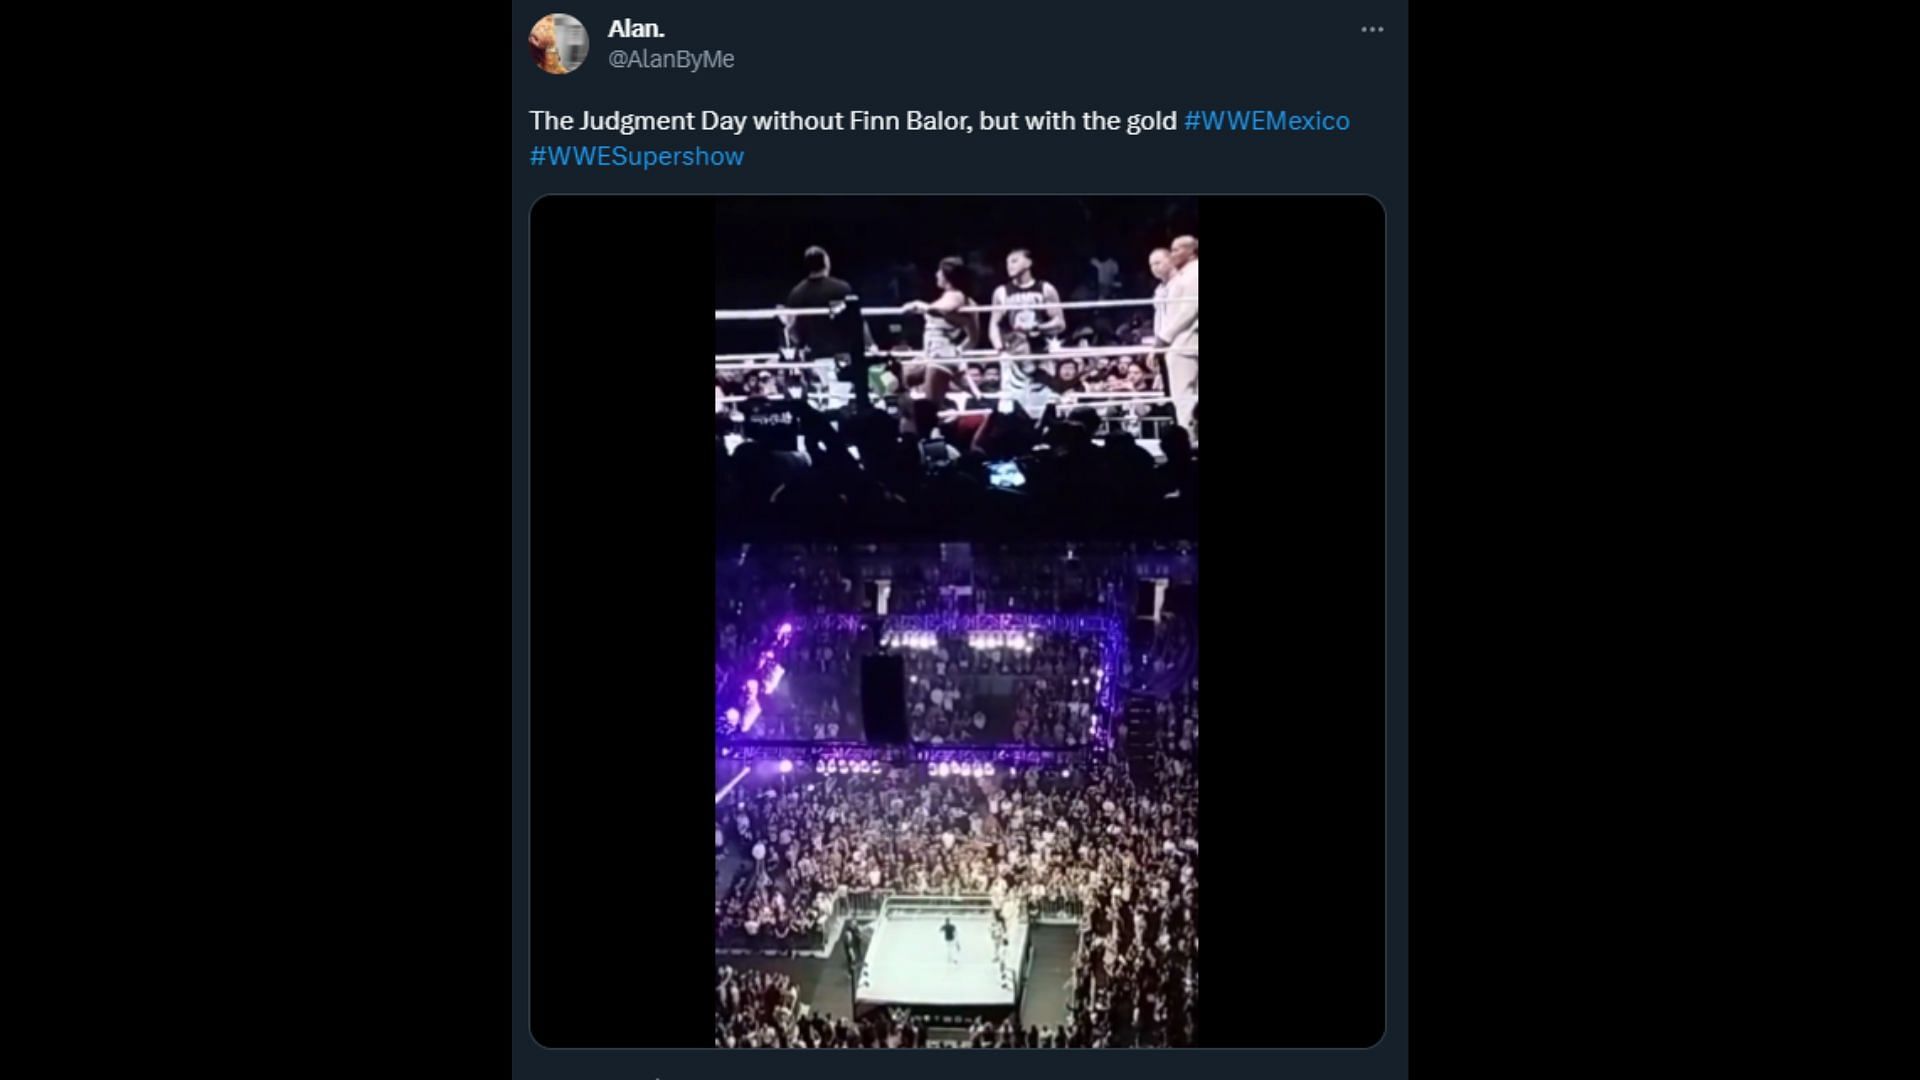 Fans posted about Finn Balor missing the show at Mexico City